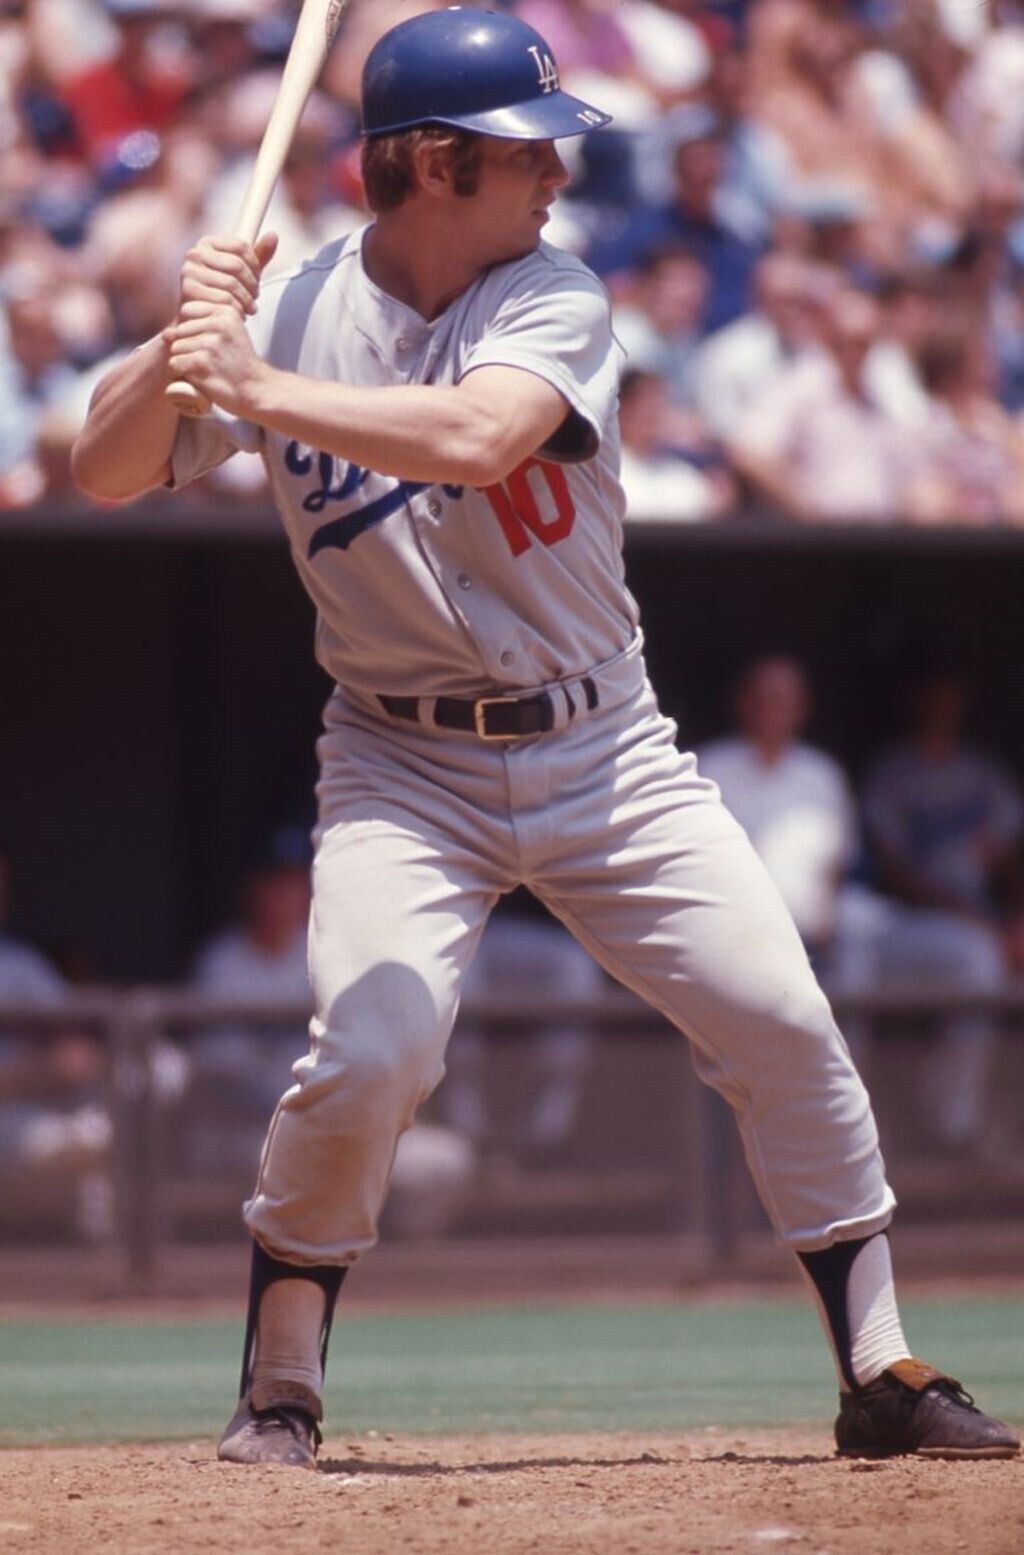 CB1-247 1973 RON CEY LOS ANGELES DODGERS STAR ORIG CLIFTON BOUTELLE 35MM SLIDE